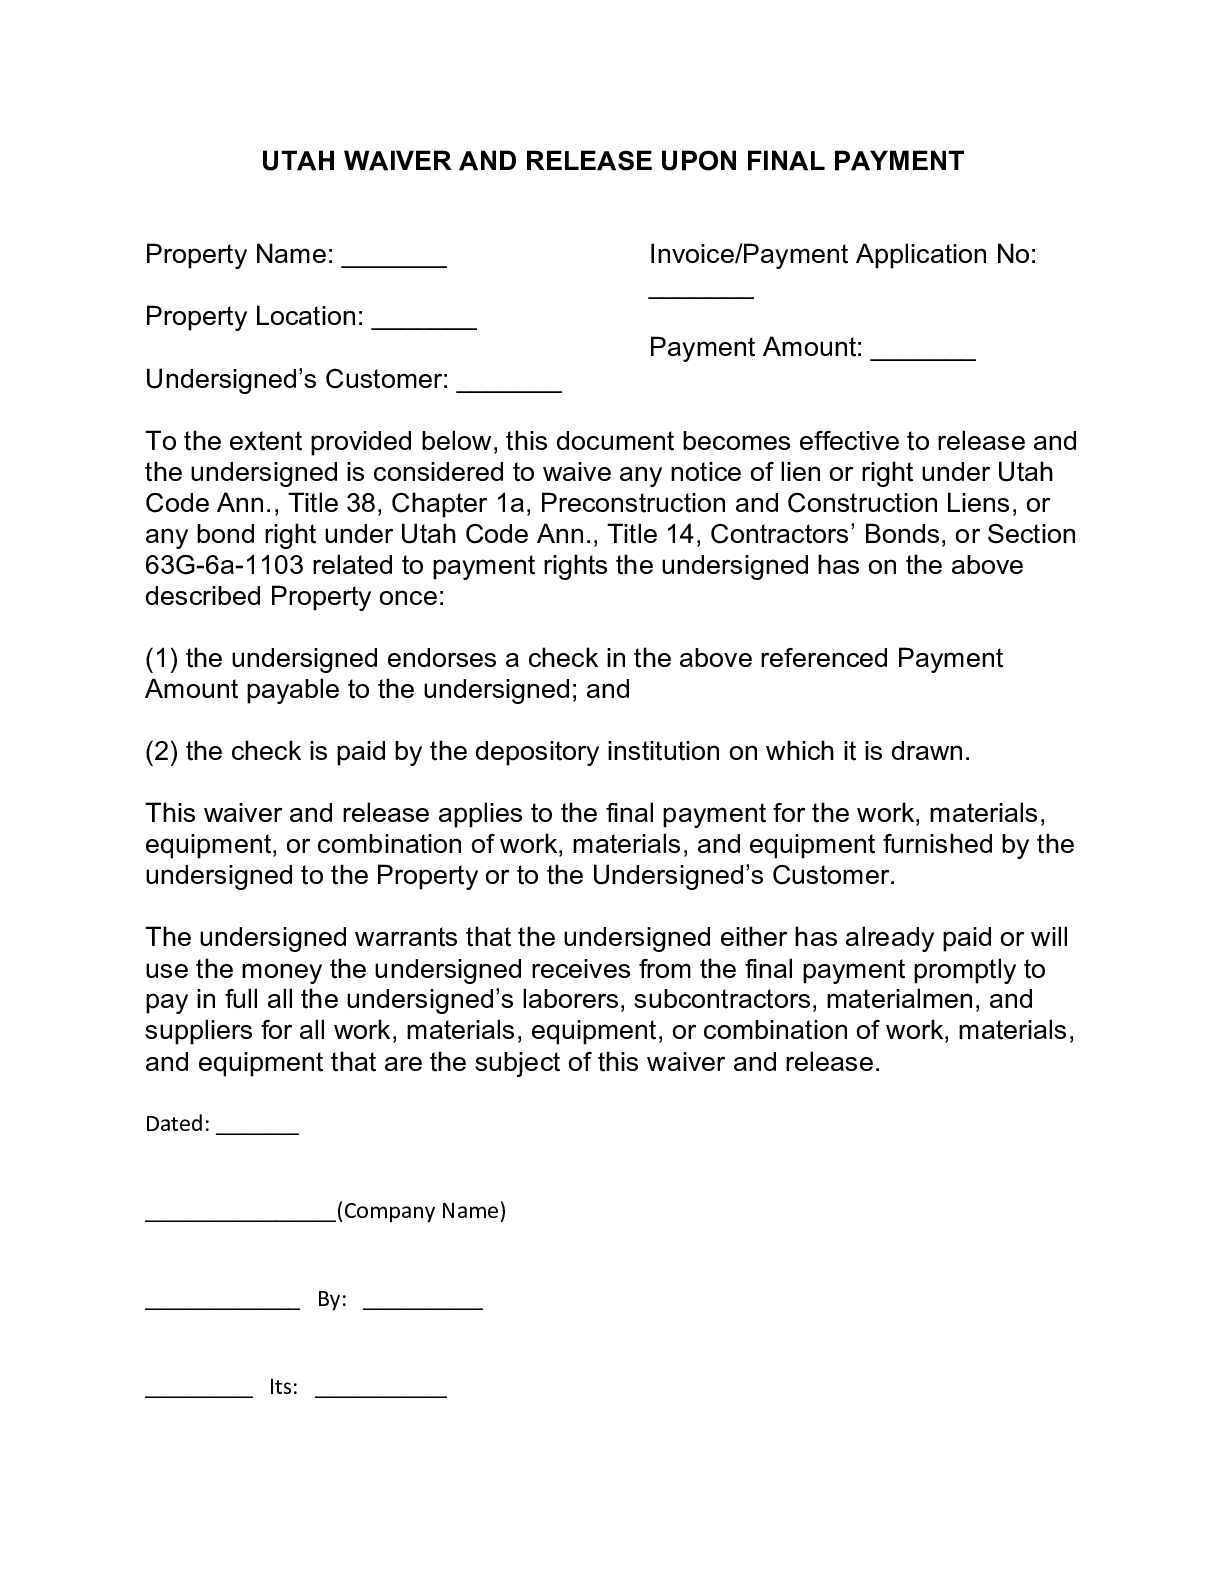 Utah Waiver and Release Upon Final Payment Form